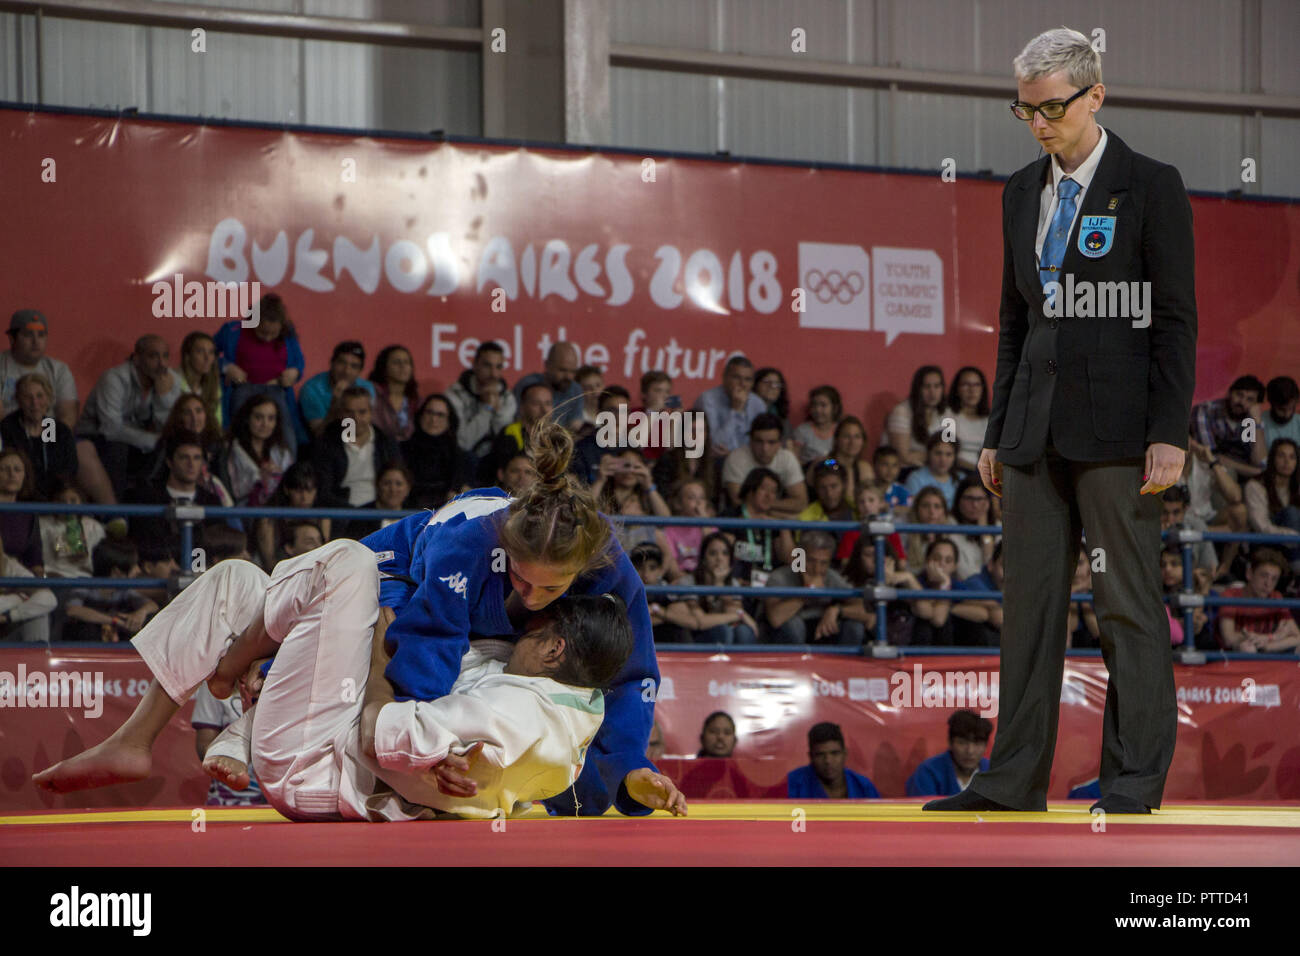 Buenos Aires, Buenos Aires, Argentina. 10th Oct, 2018. Finals of mixed international judo teams. The Italian Toniolo Veronica (Of blue), member of the team Beijing winner of the gold medal, faces the member of the Athens team, winner of the silver medal, the judoka of Madagascar Andriamifehy Mireille Credit: Roberto Almeida Aveledo/ZUMA Wire/Alamy Live News Stock Photo